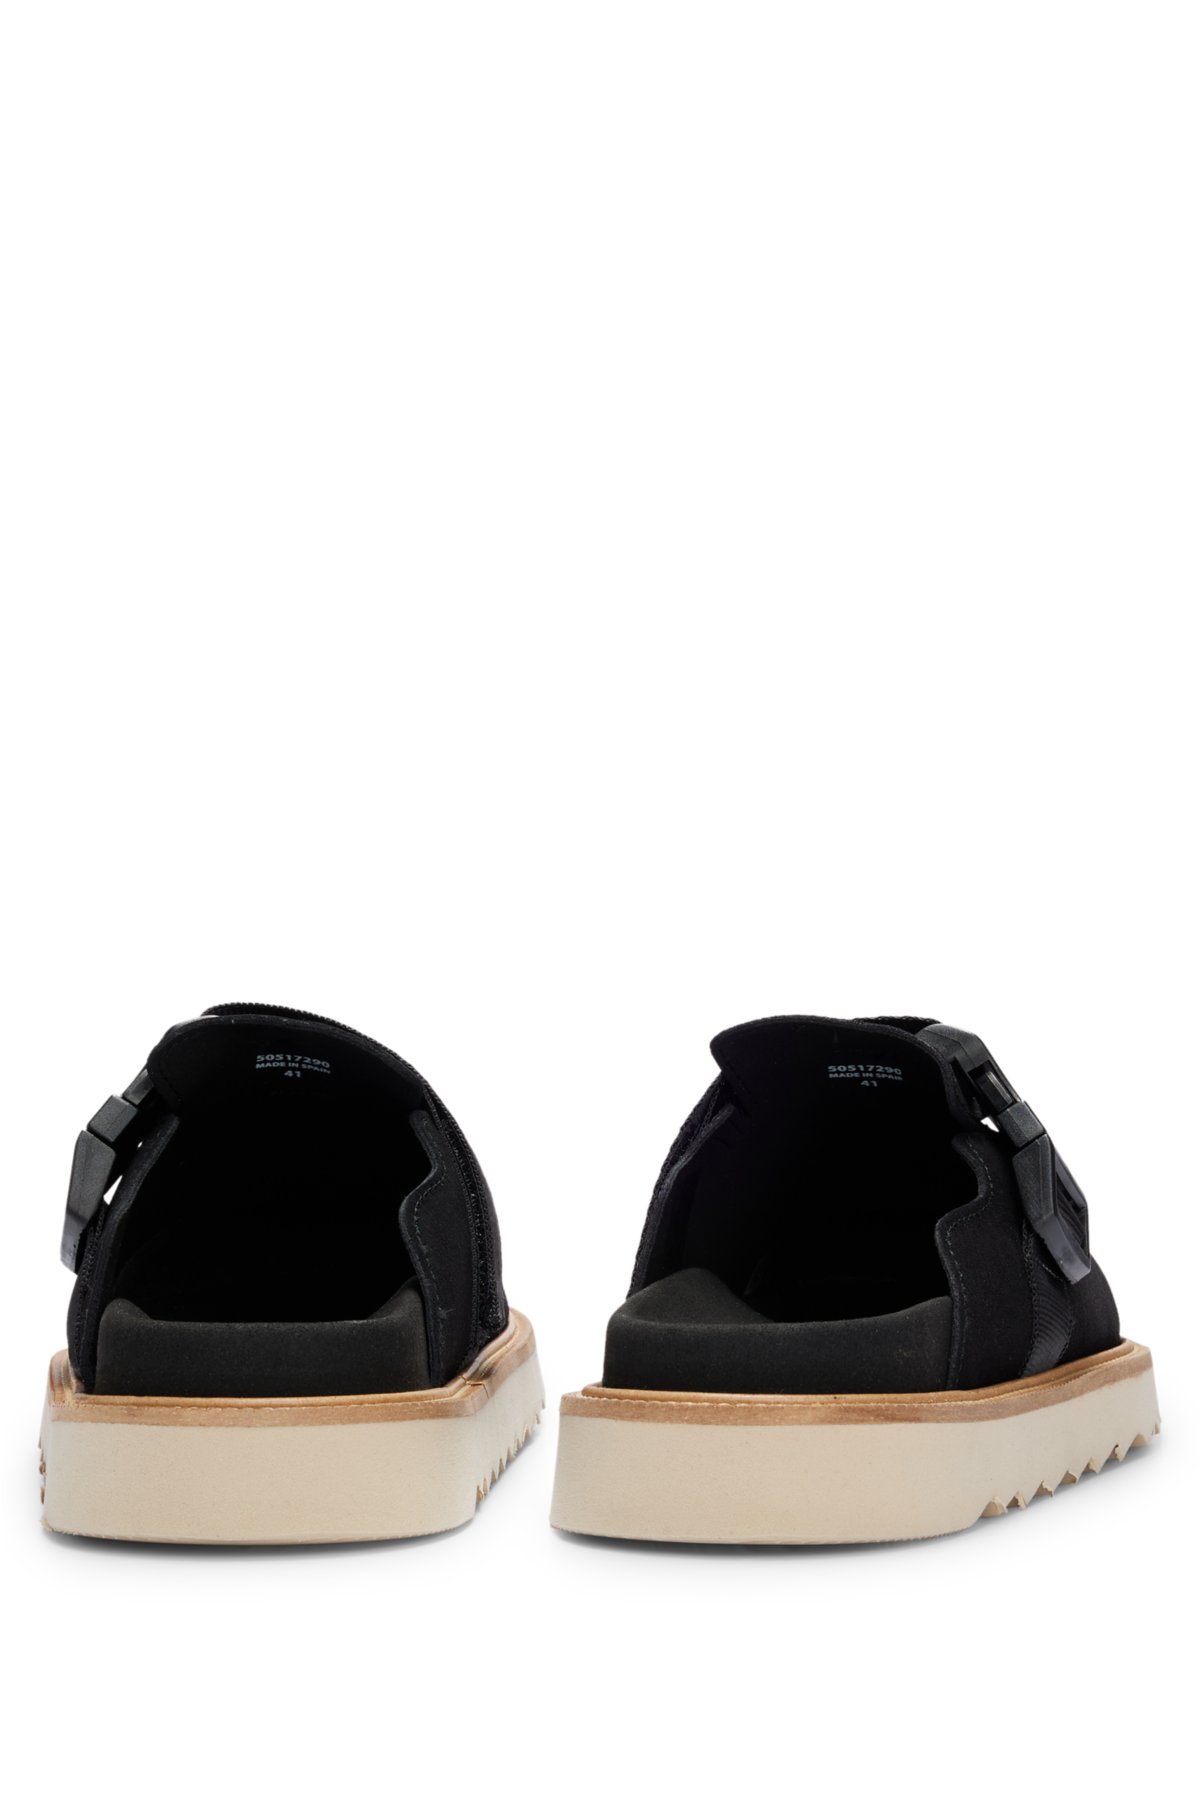 Suede slip-on shoes with buckled strap, Black